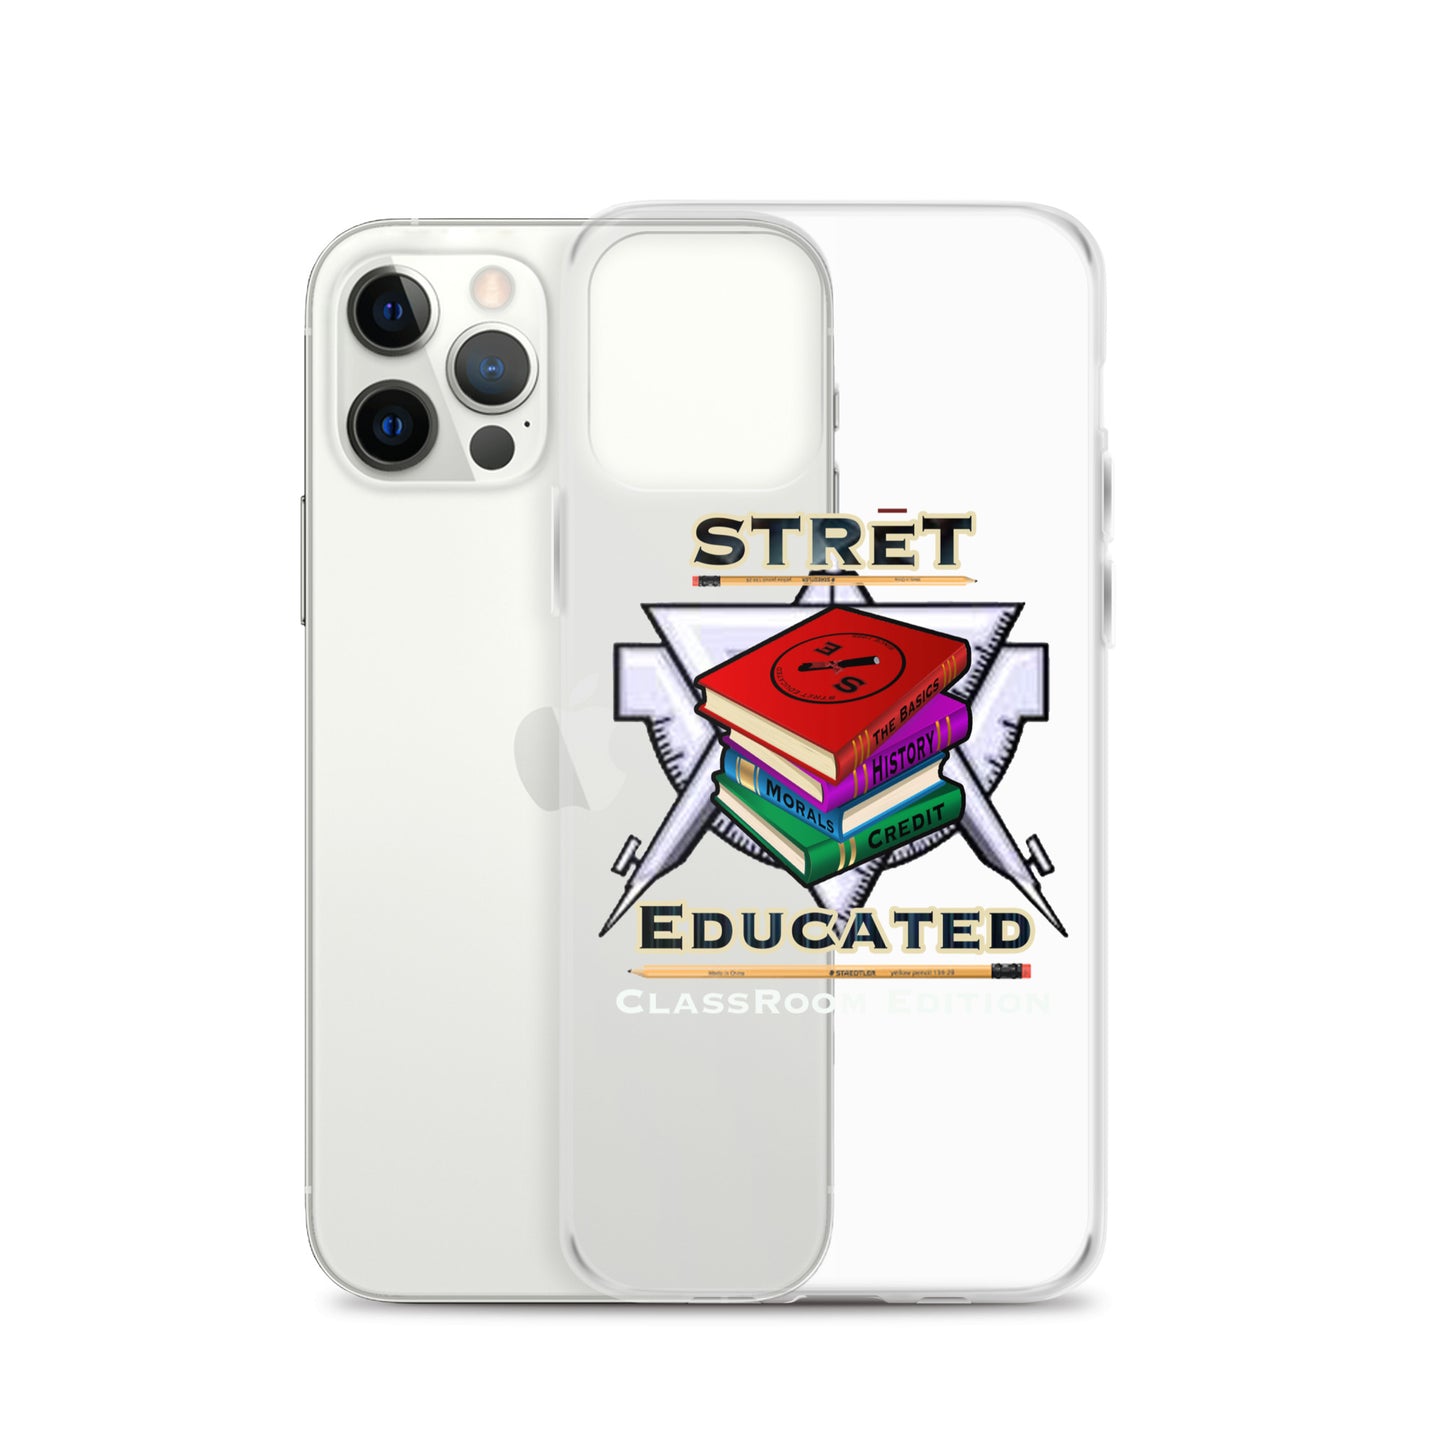 Classroom Edition iPhone Case